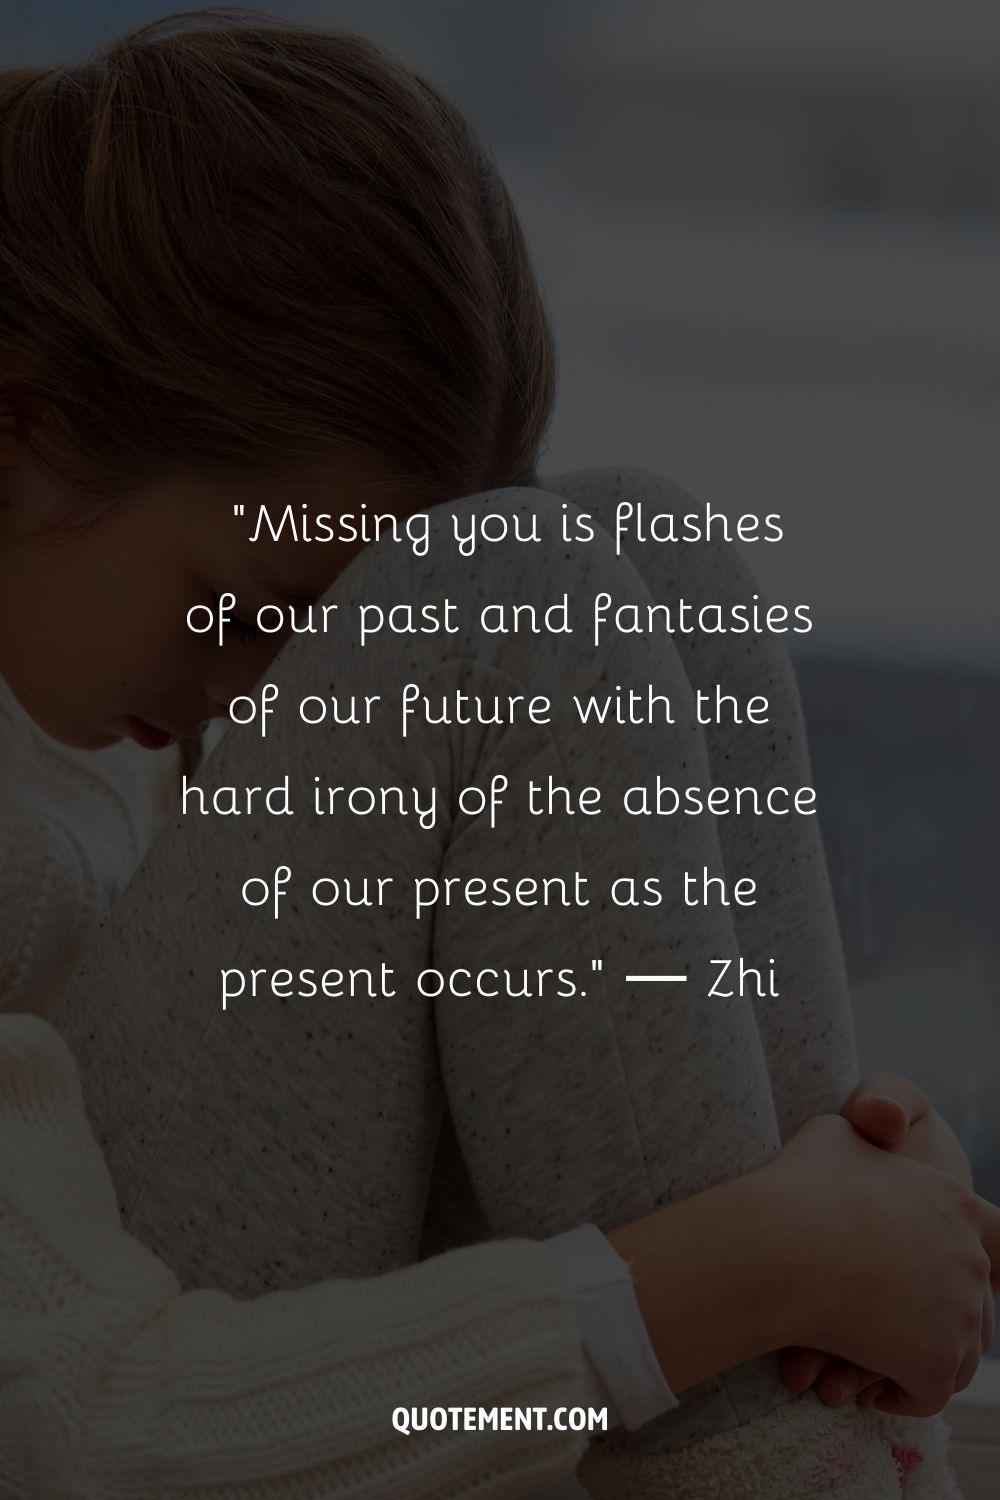 Missing you is flashes of our past and fantasies of our future with the hard irony of the absence of our present as the present occurs